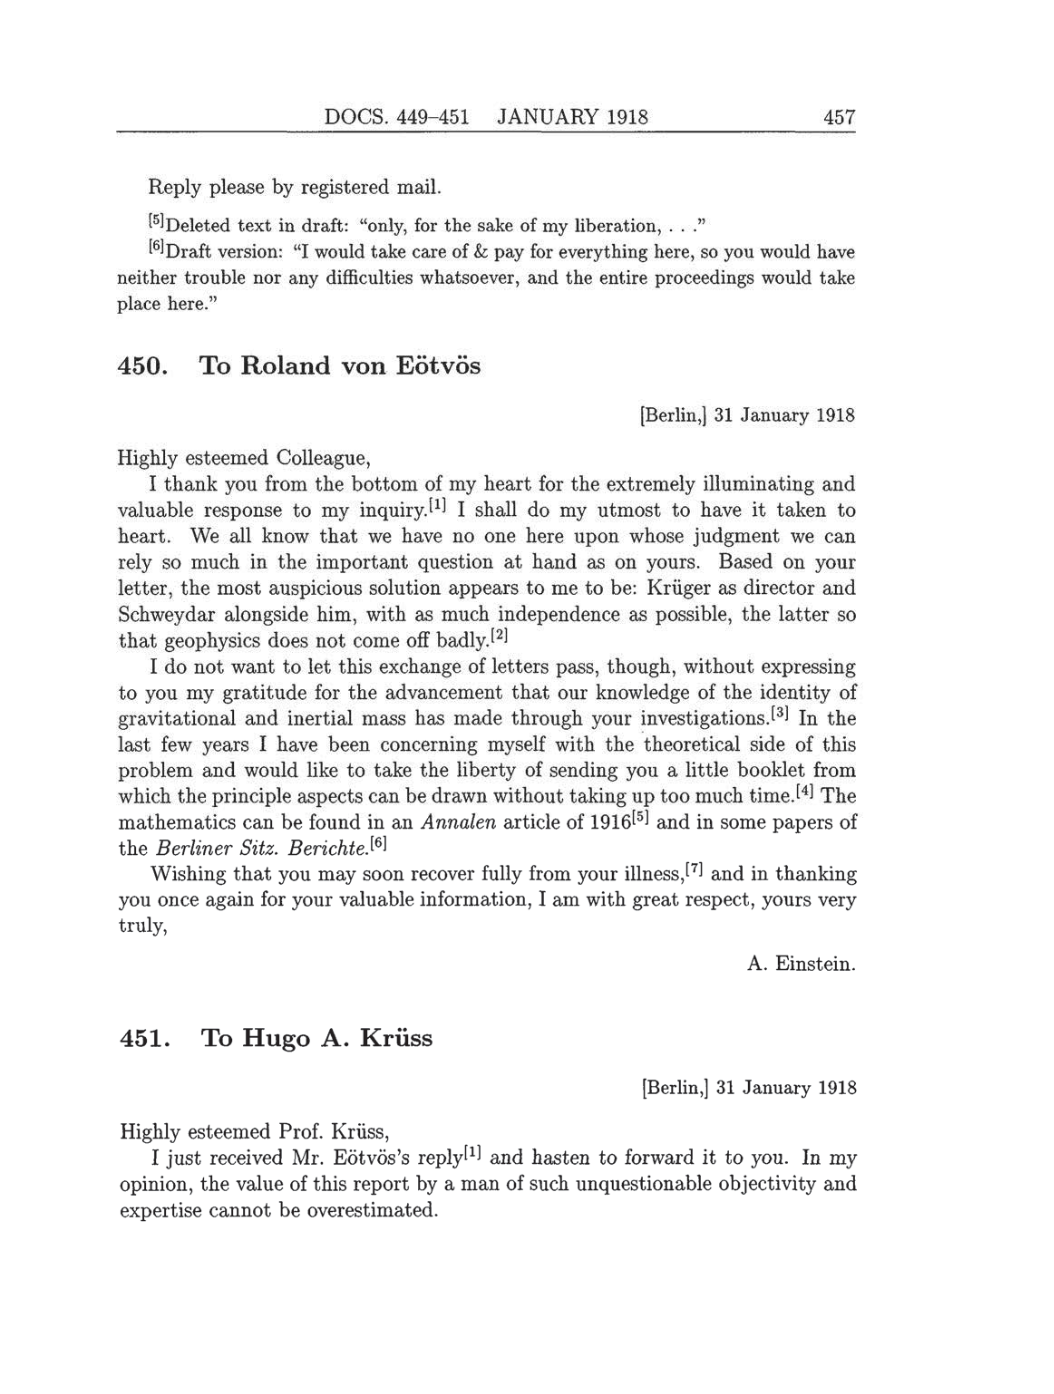 Volume 8: The Berlin Years: Correspondence, 1914-1918 (English translation supplement) page 457